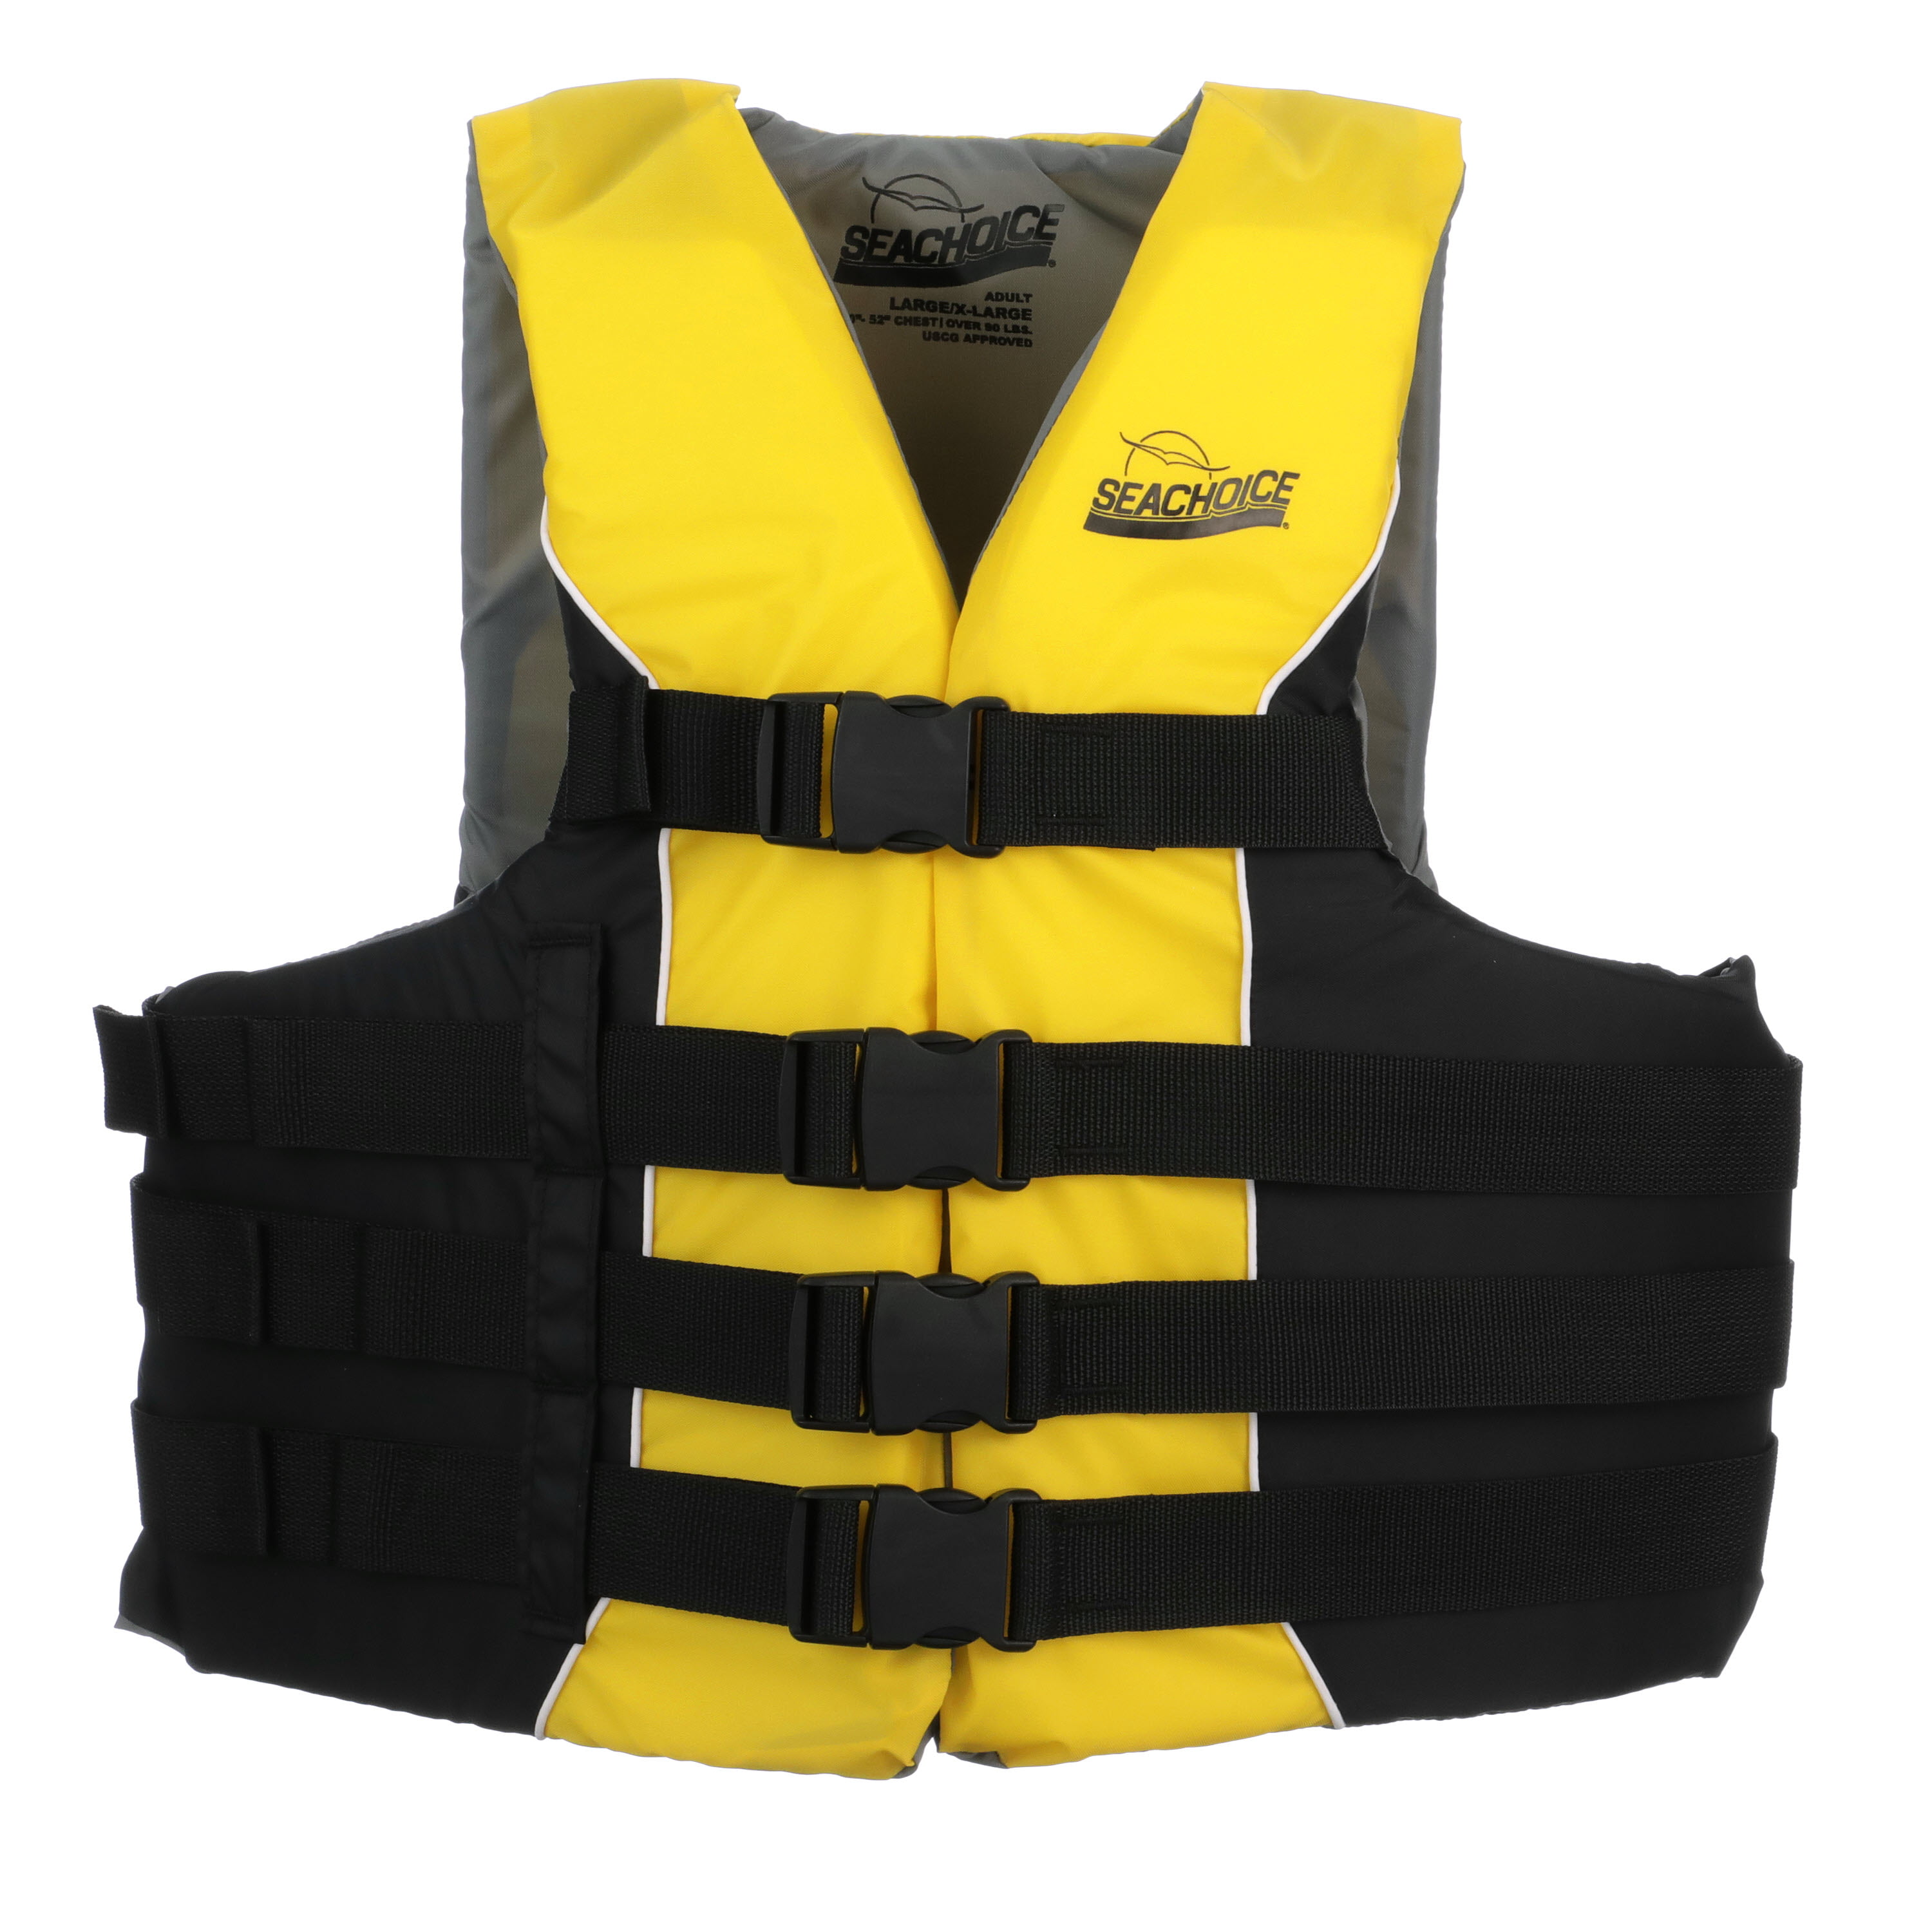 Details about   Seachoice Life Vest Type Ii Personal Flotation Device Uscg Approved Mul 